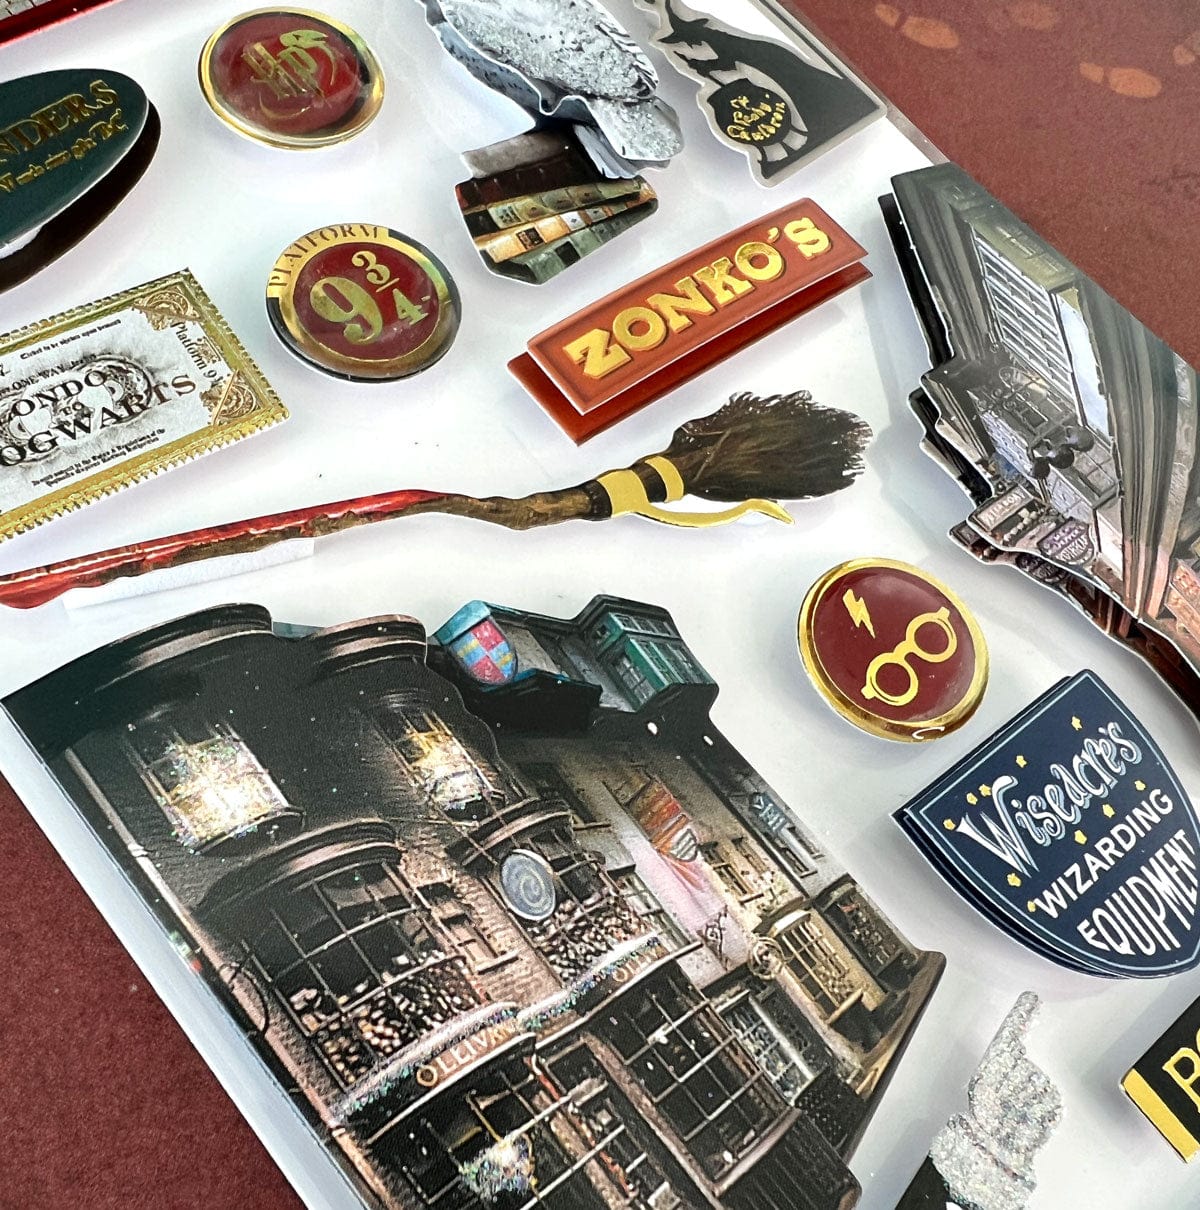 Harry Potter Stickers - Foil Spells & Charms